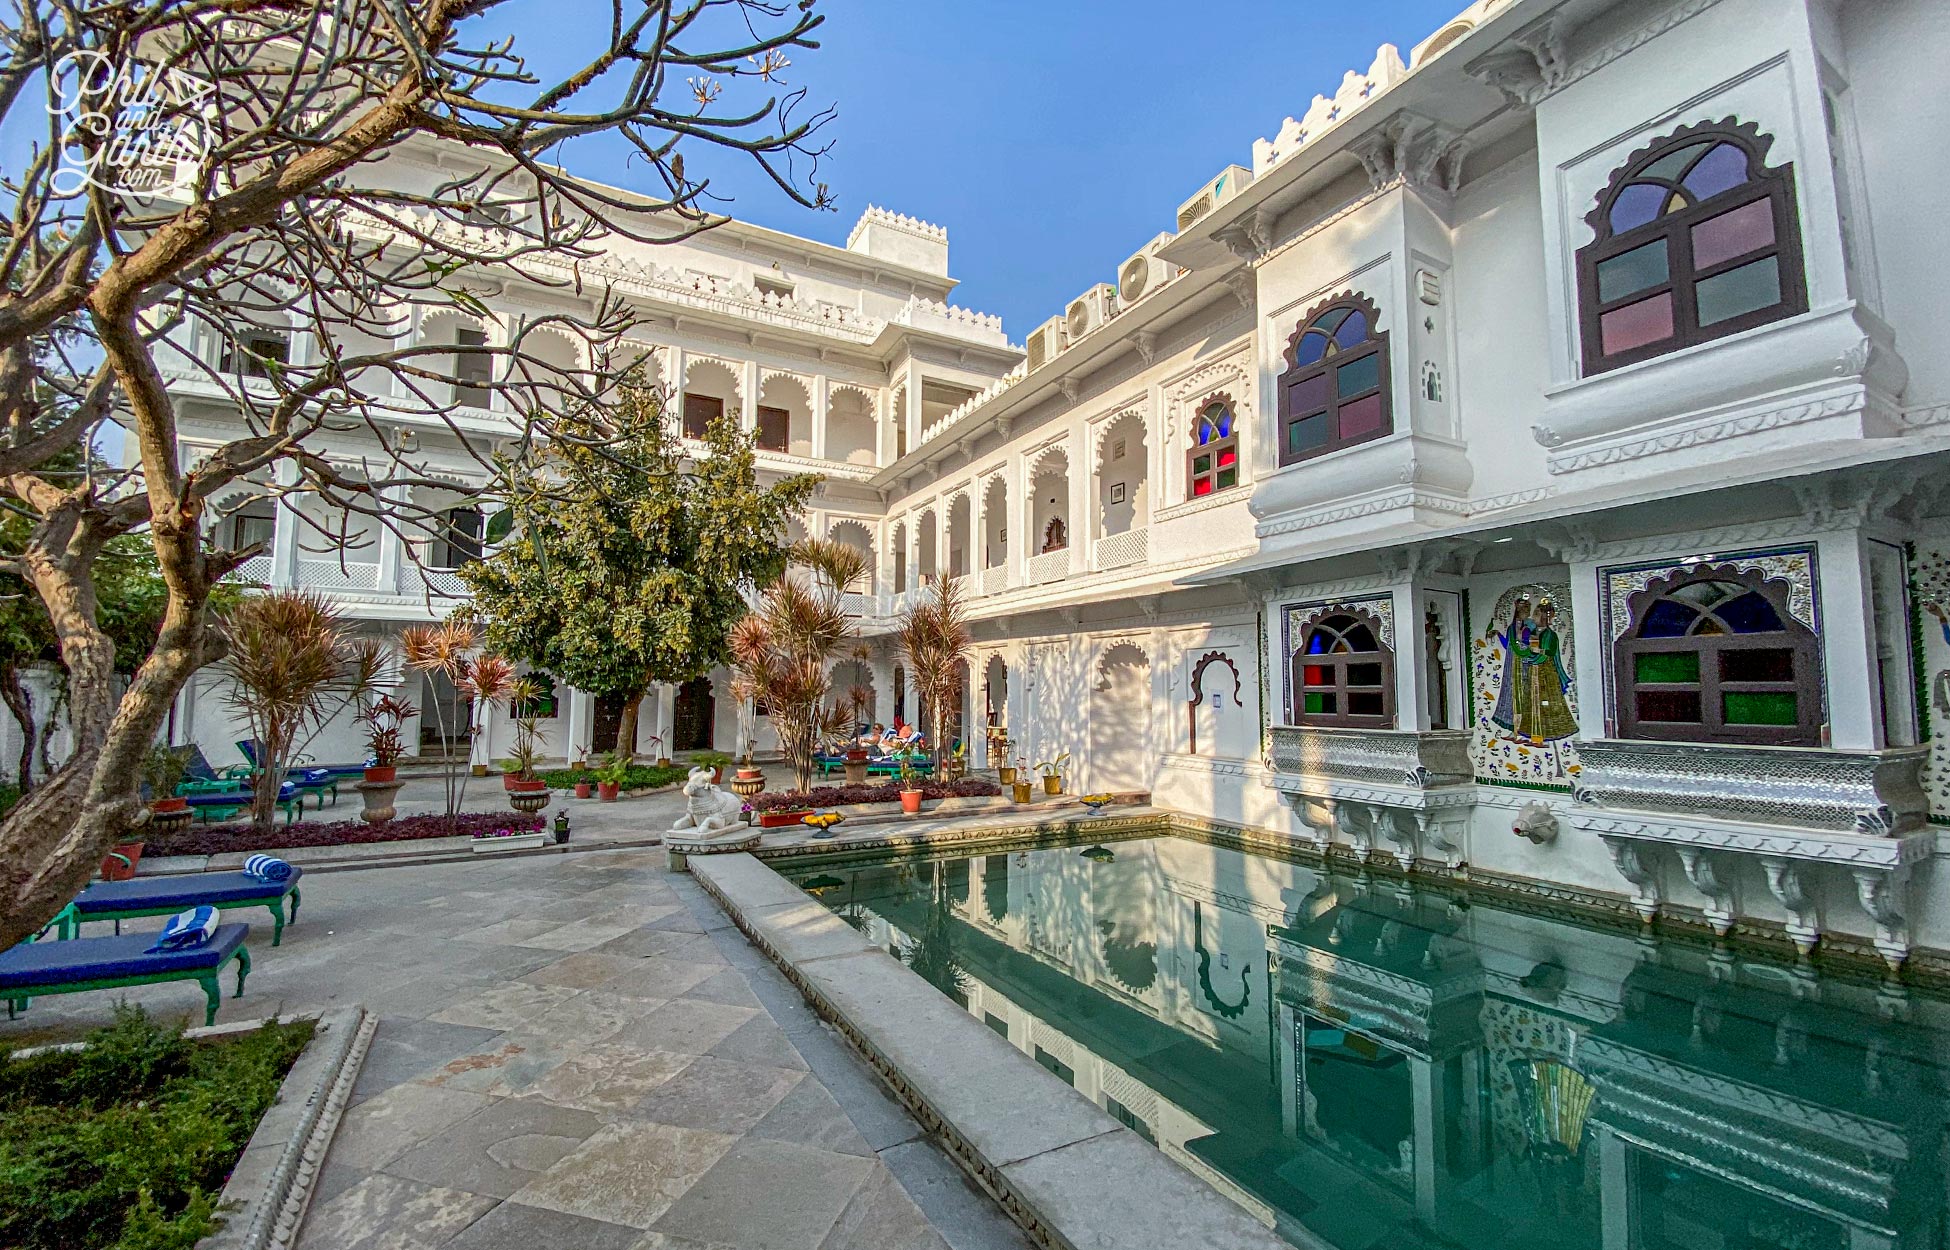 Amet Haveli is stunning we would love to stay here next time we visit Udaipur